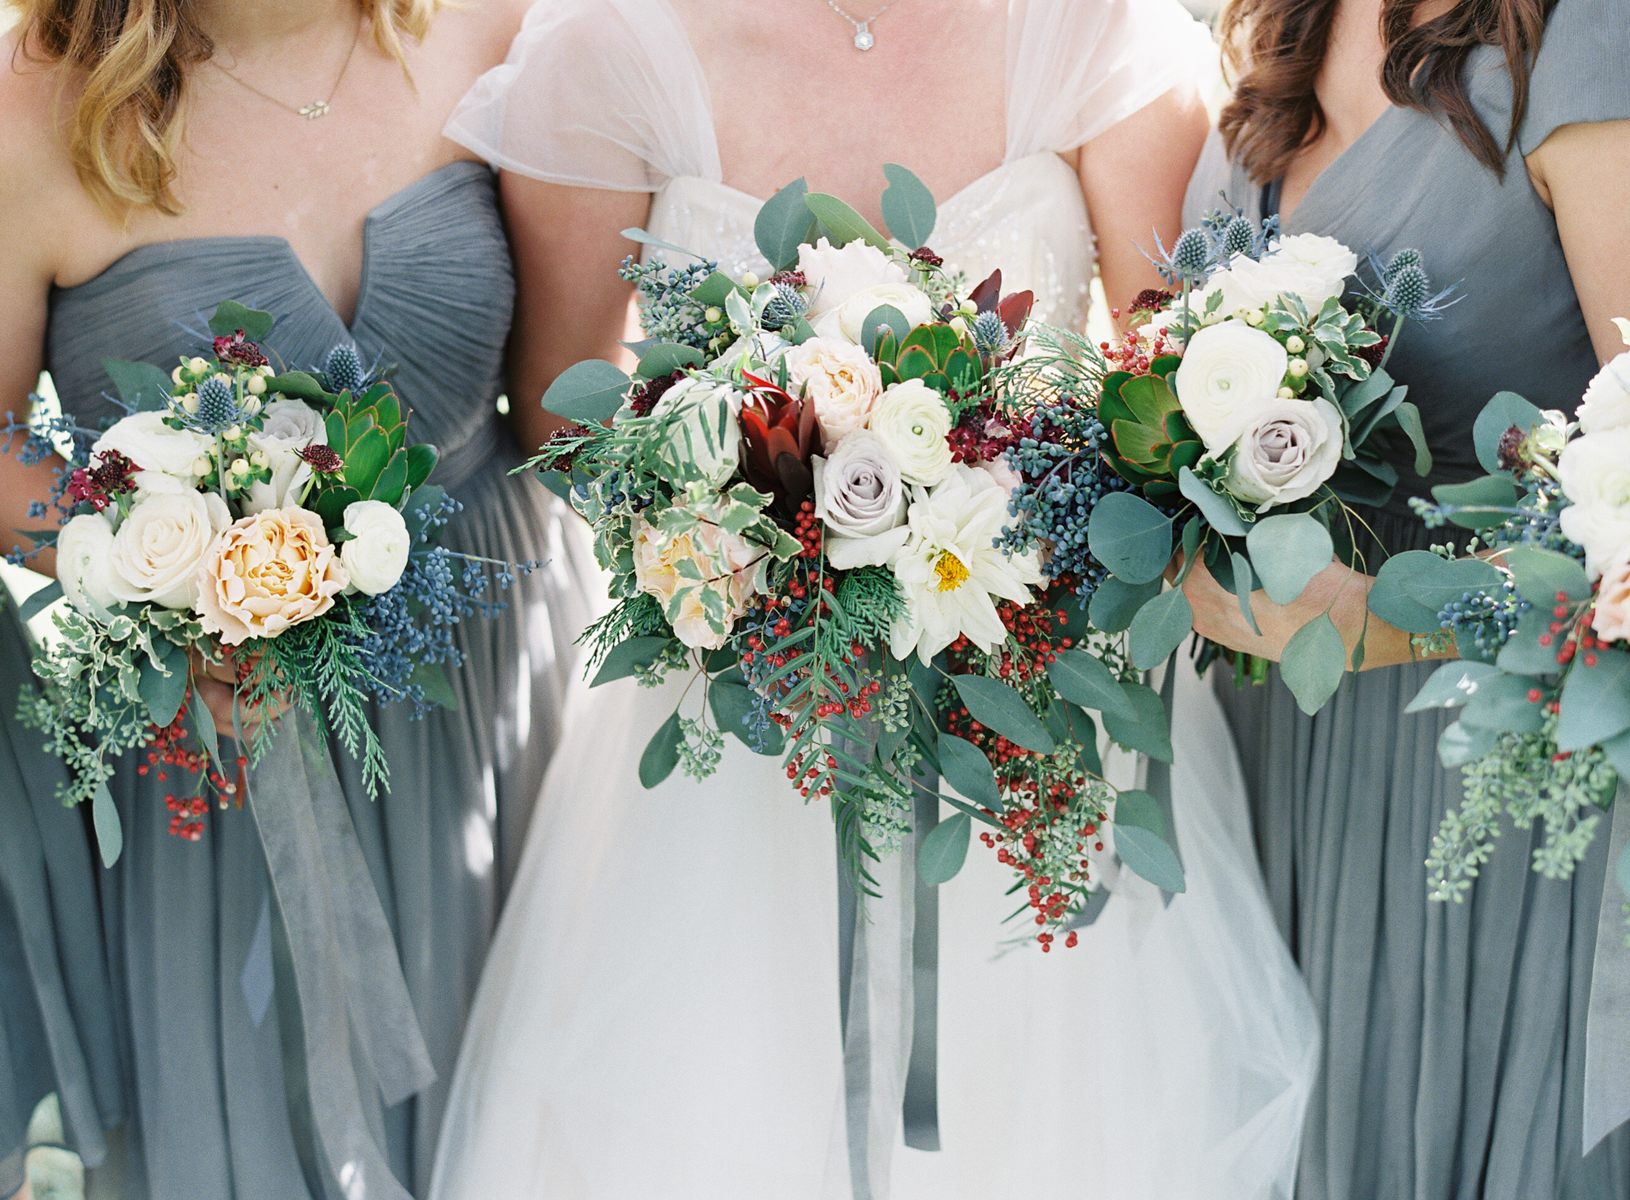 Bouquets with berries, protea, roses, and dahlias // Nashville Wedding Florist